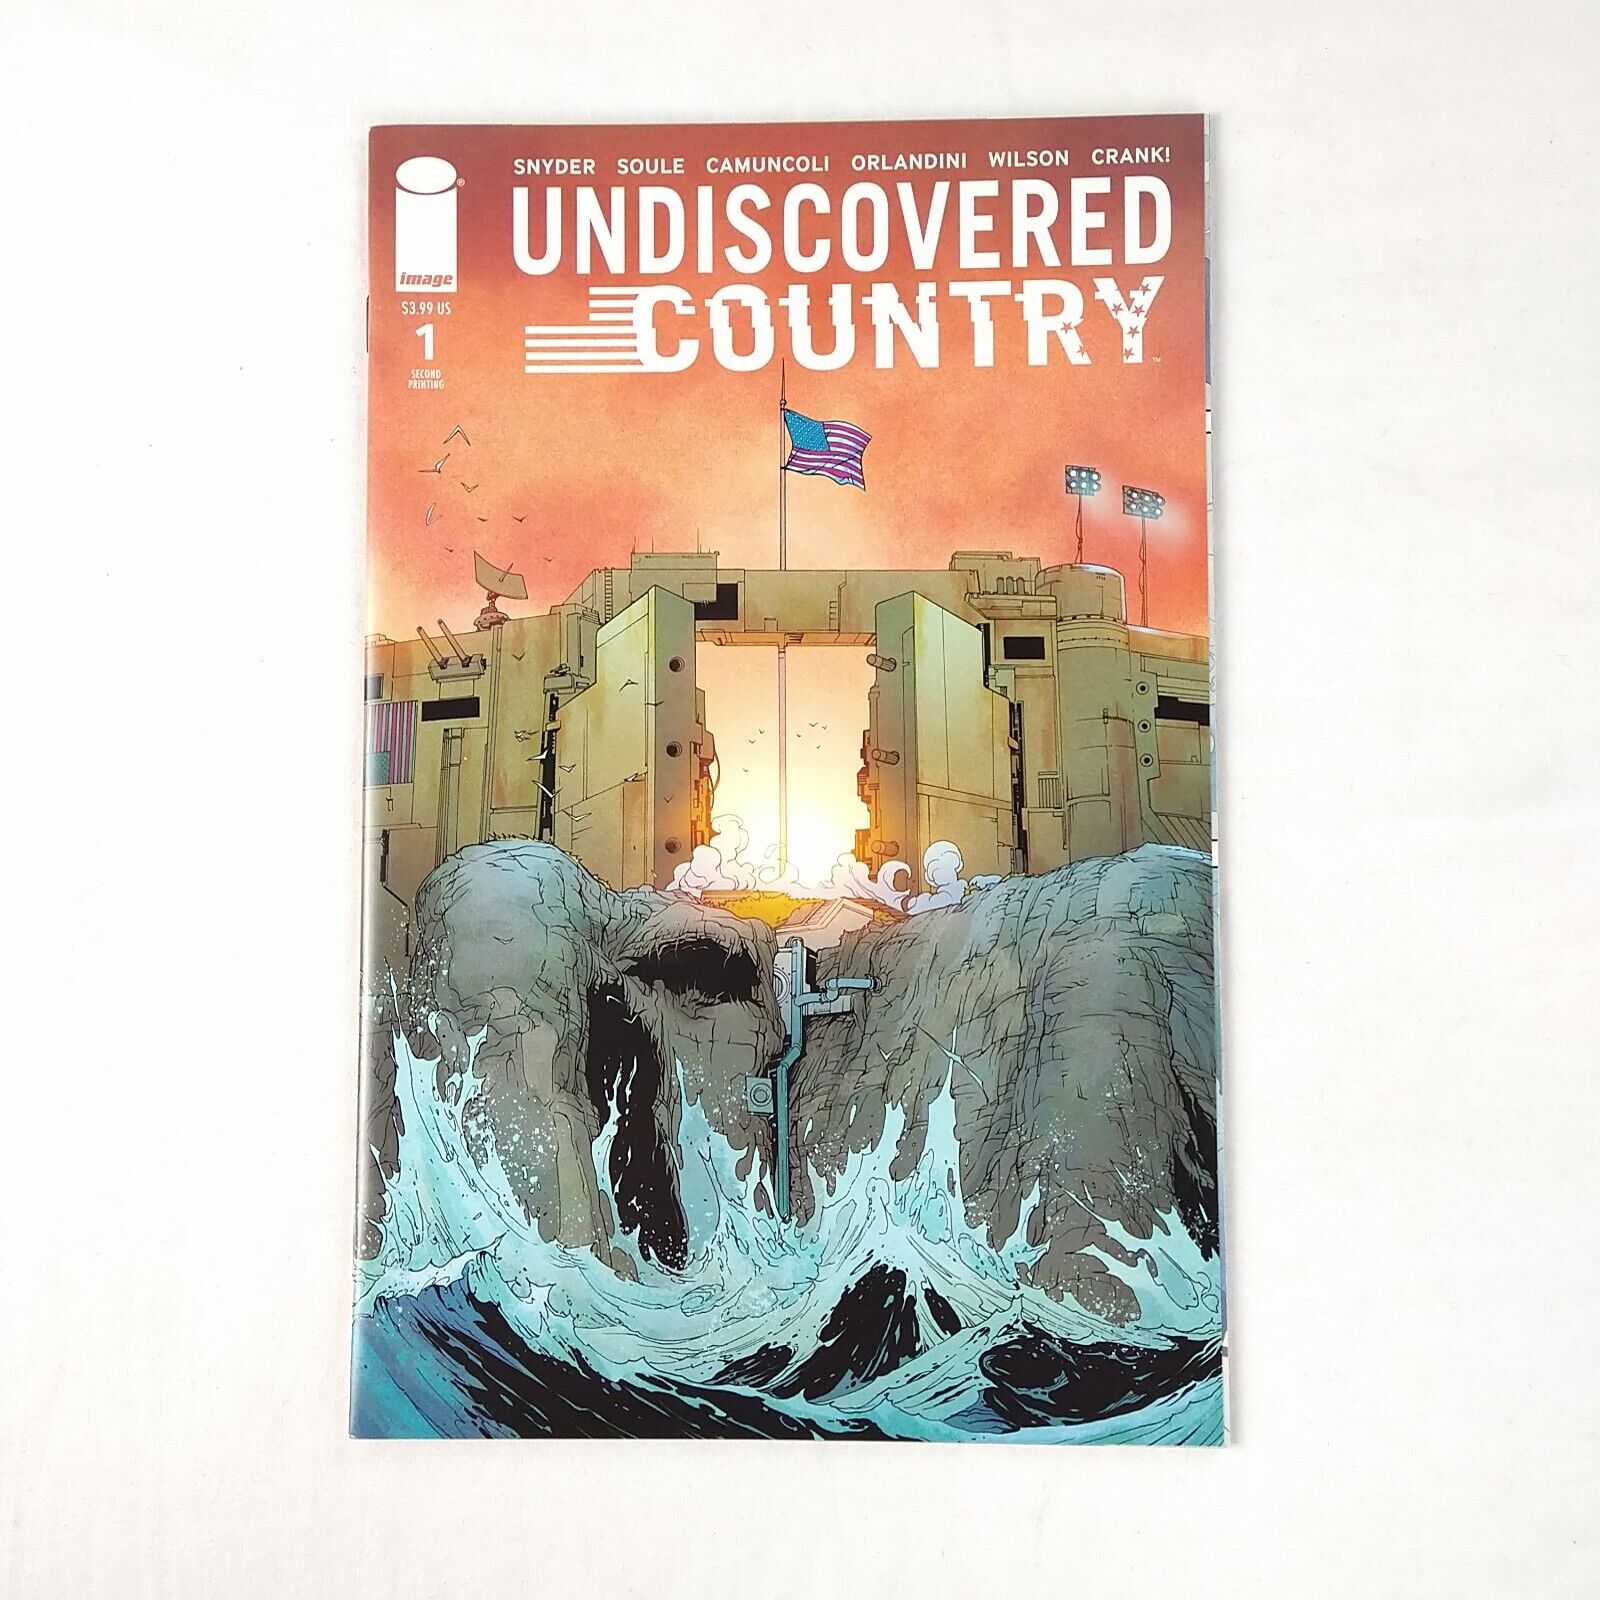 Undiscovered Country #1 Snyder Soule VF/NM (2019 Image Comics)